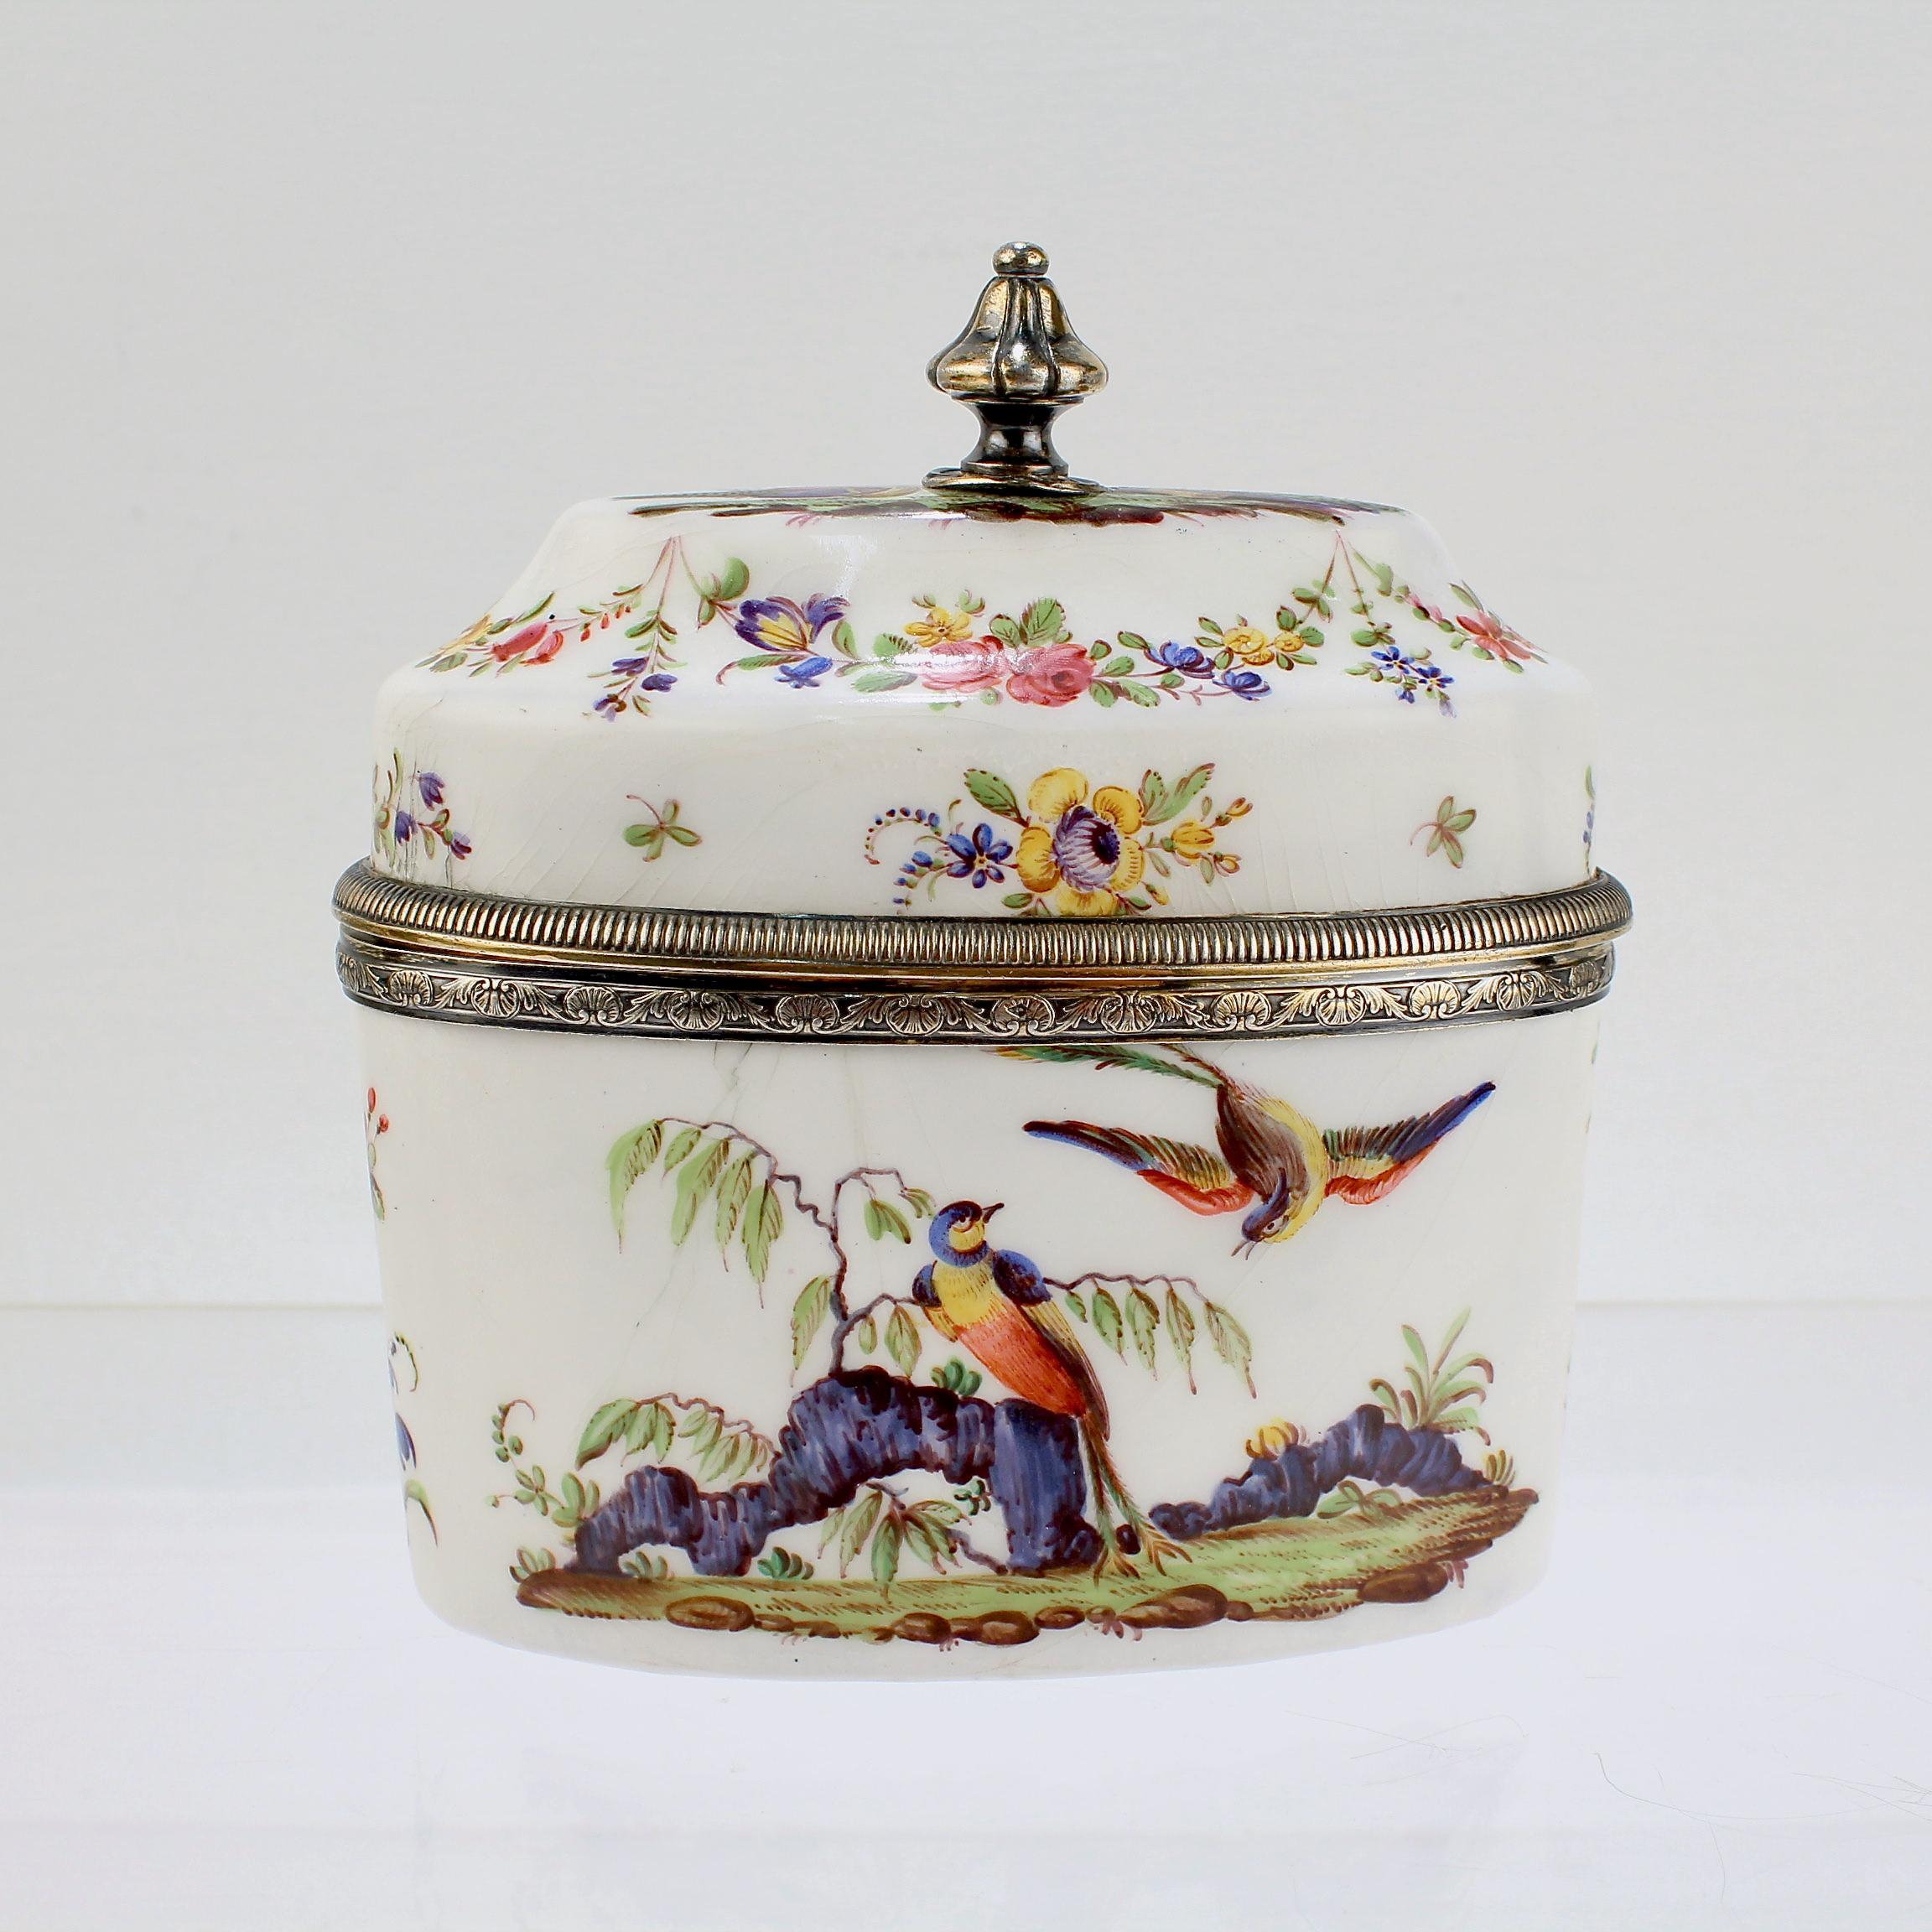 Antique 19th Century French Beaux-Arts Silver-Mounted Enamel Tea Caddy by Risler In Fair Condition For Sale In Philadelphia, PA